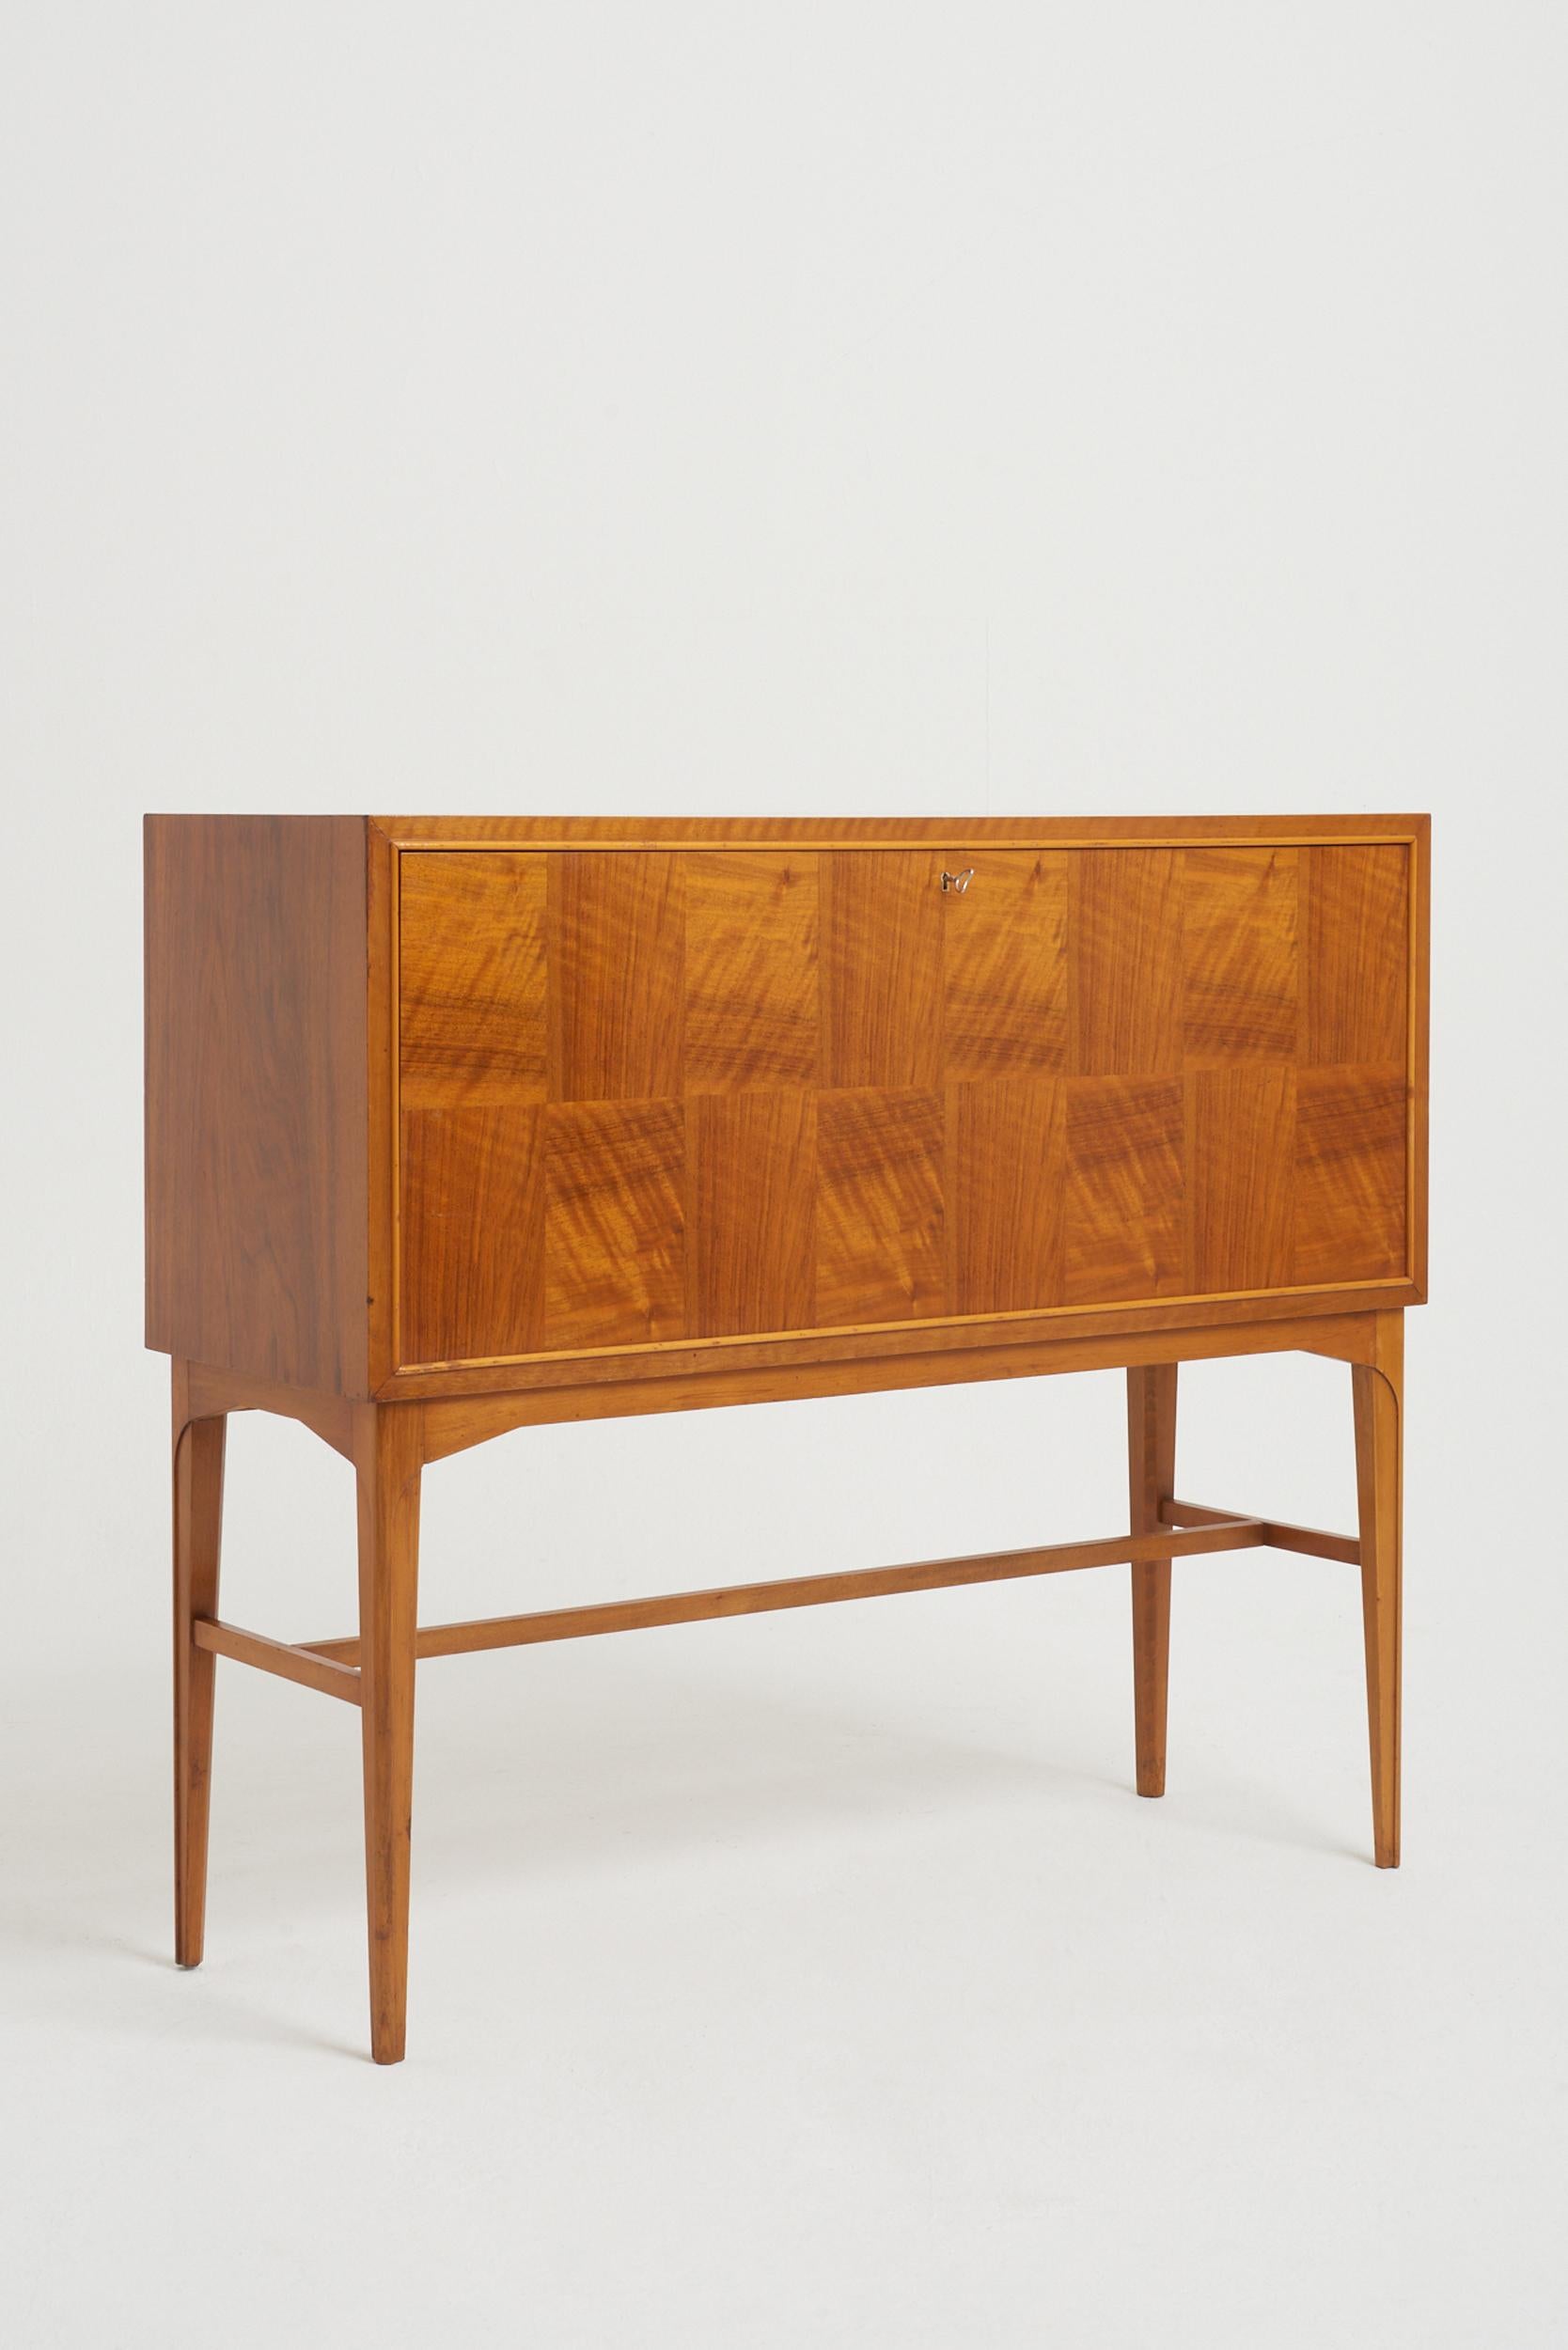 A cocktail cabinet by Carl-Axel Acking (1910-2001), mahogany, walnut and beech, the fully fitted interior with a revolving bottle compartments, drawers and glass shelves, internally lit. 
Sweden, circa 1950